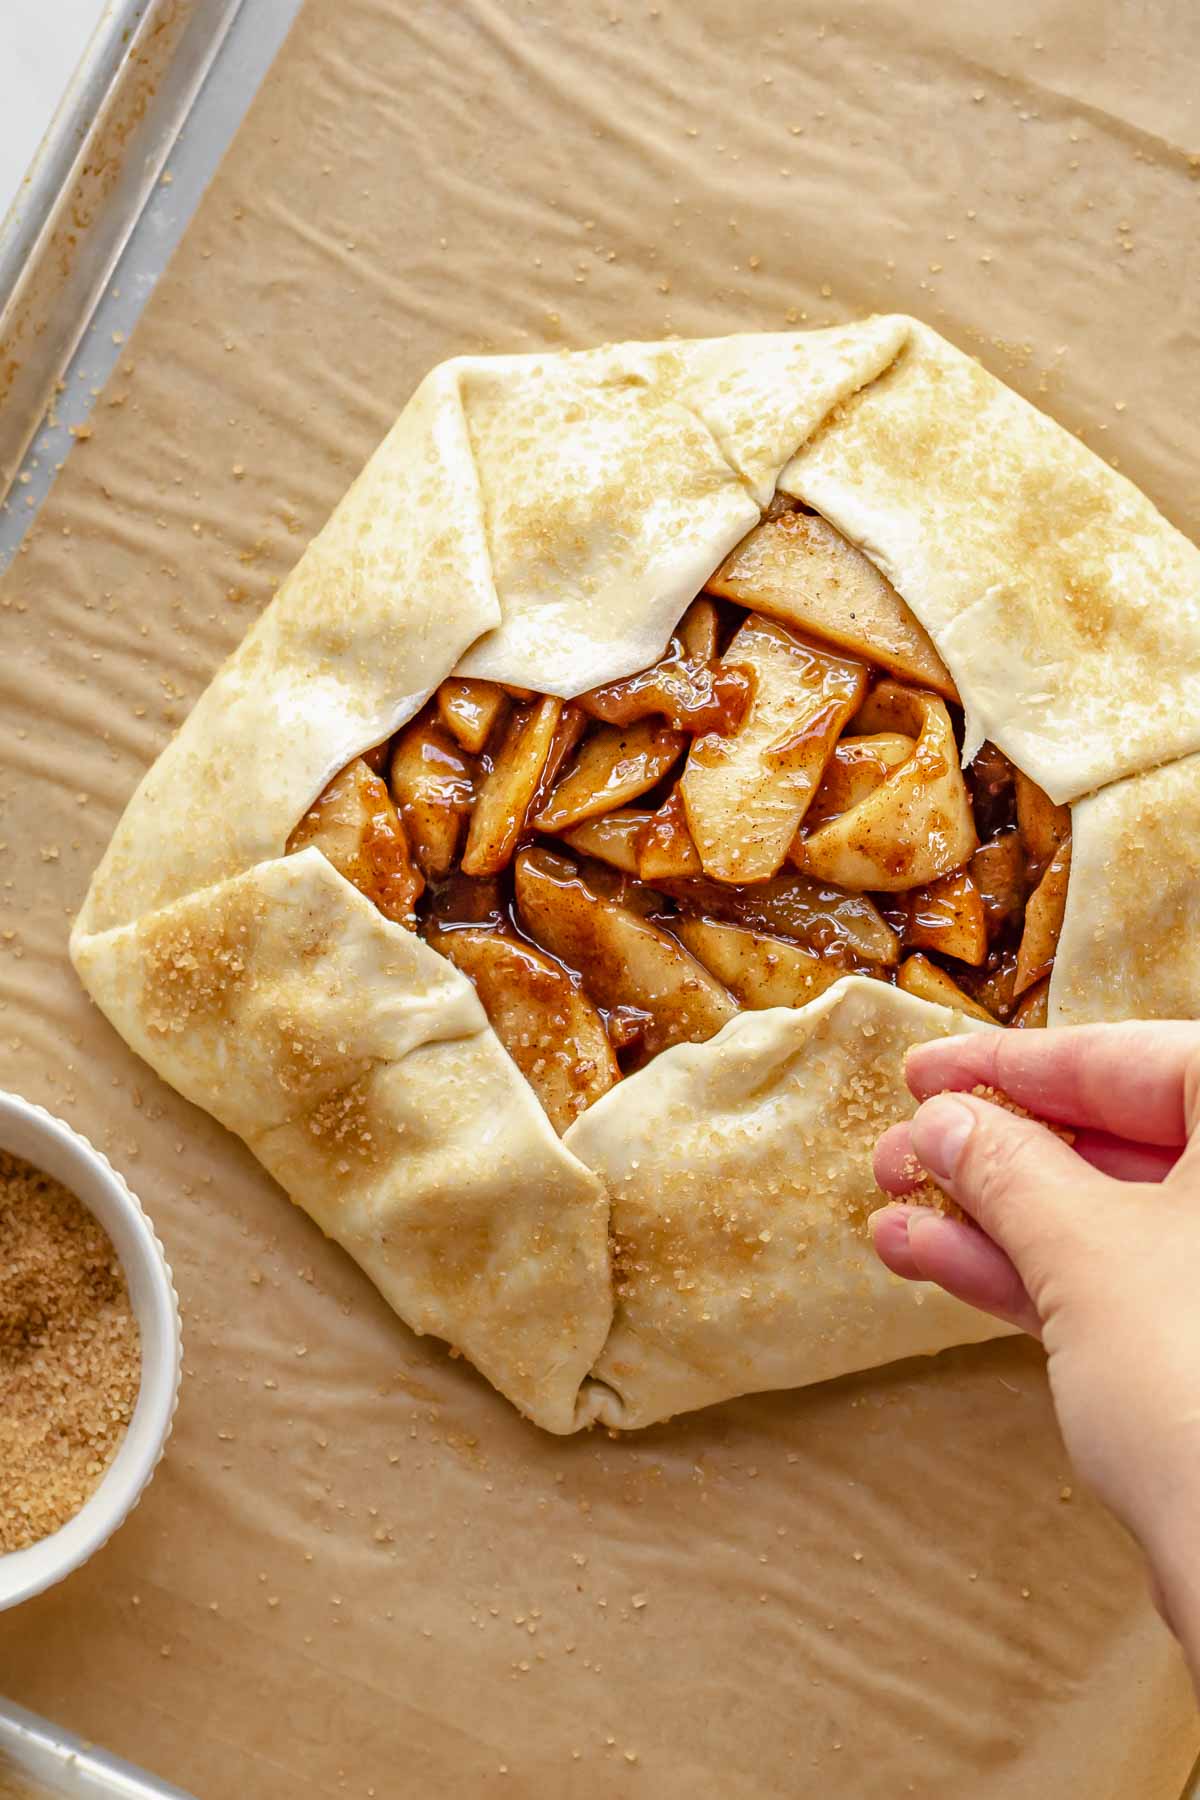 A hand sprinkles coarse sugar on the pie crust before baking.